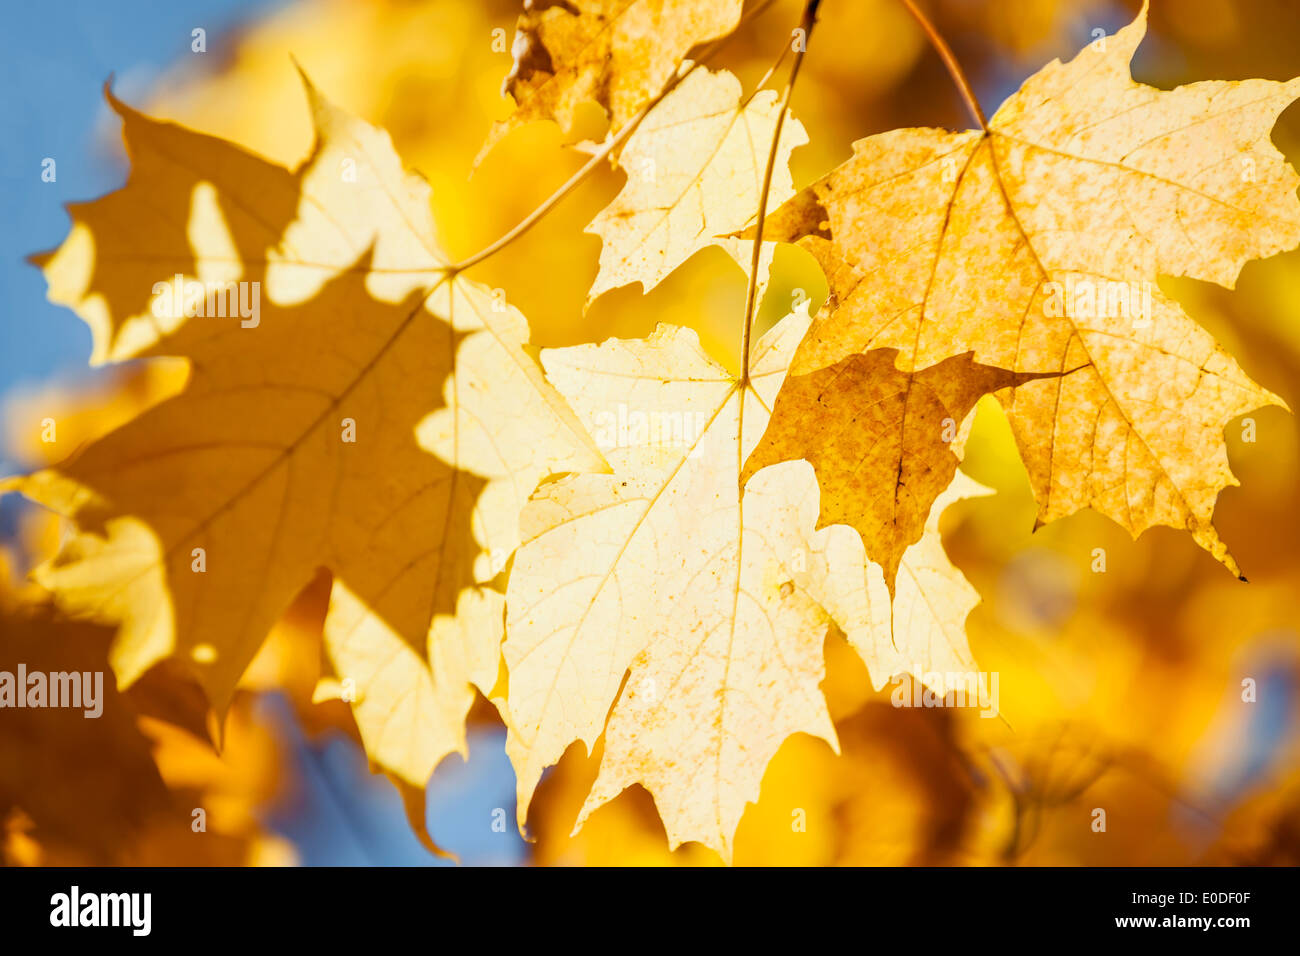 Orange and yellow backlit fall maple leaves glowing in autumn sunshine with blue sky Stock Photo